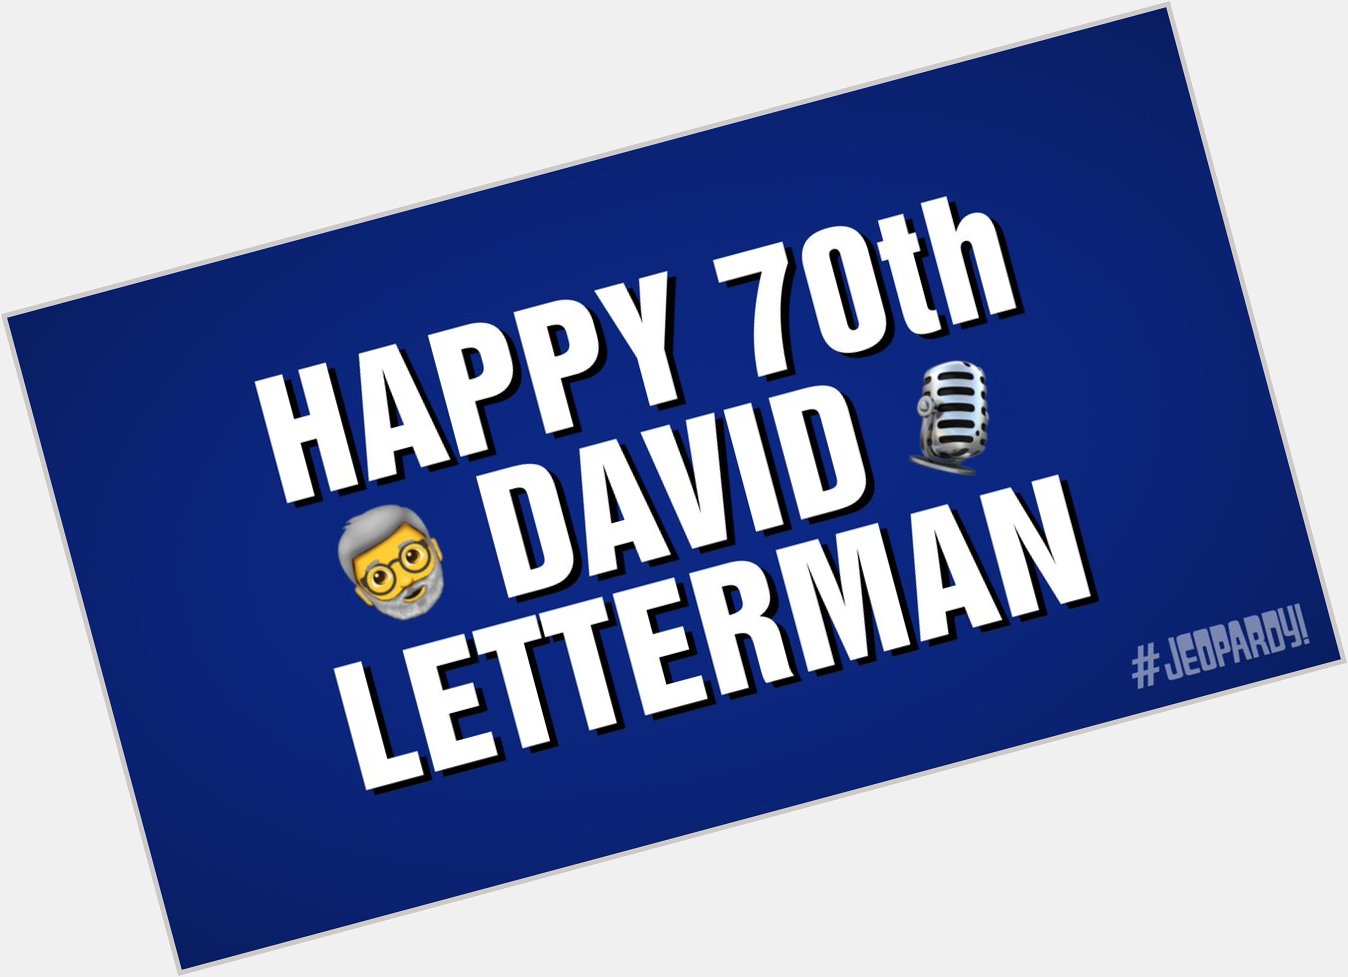 Celebrate a legend\s birthday with the HAPPY 70th, DAVID LETTERMAN category! 